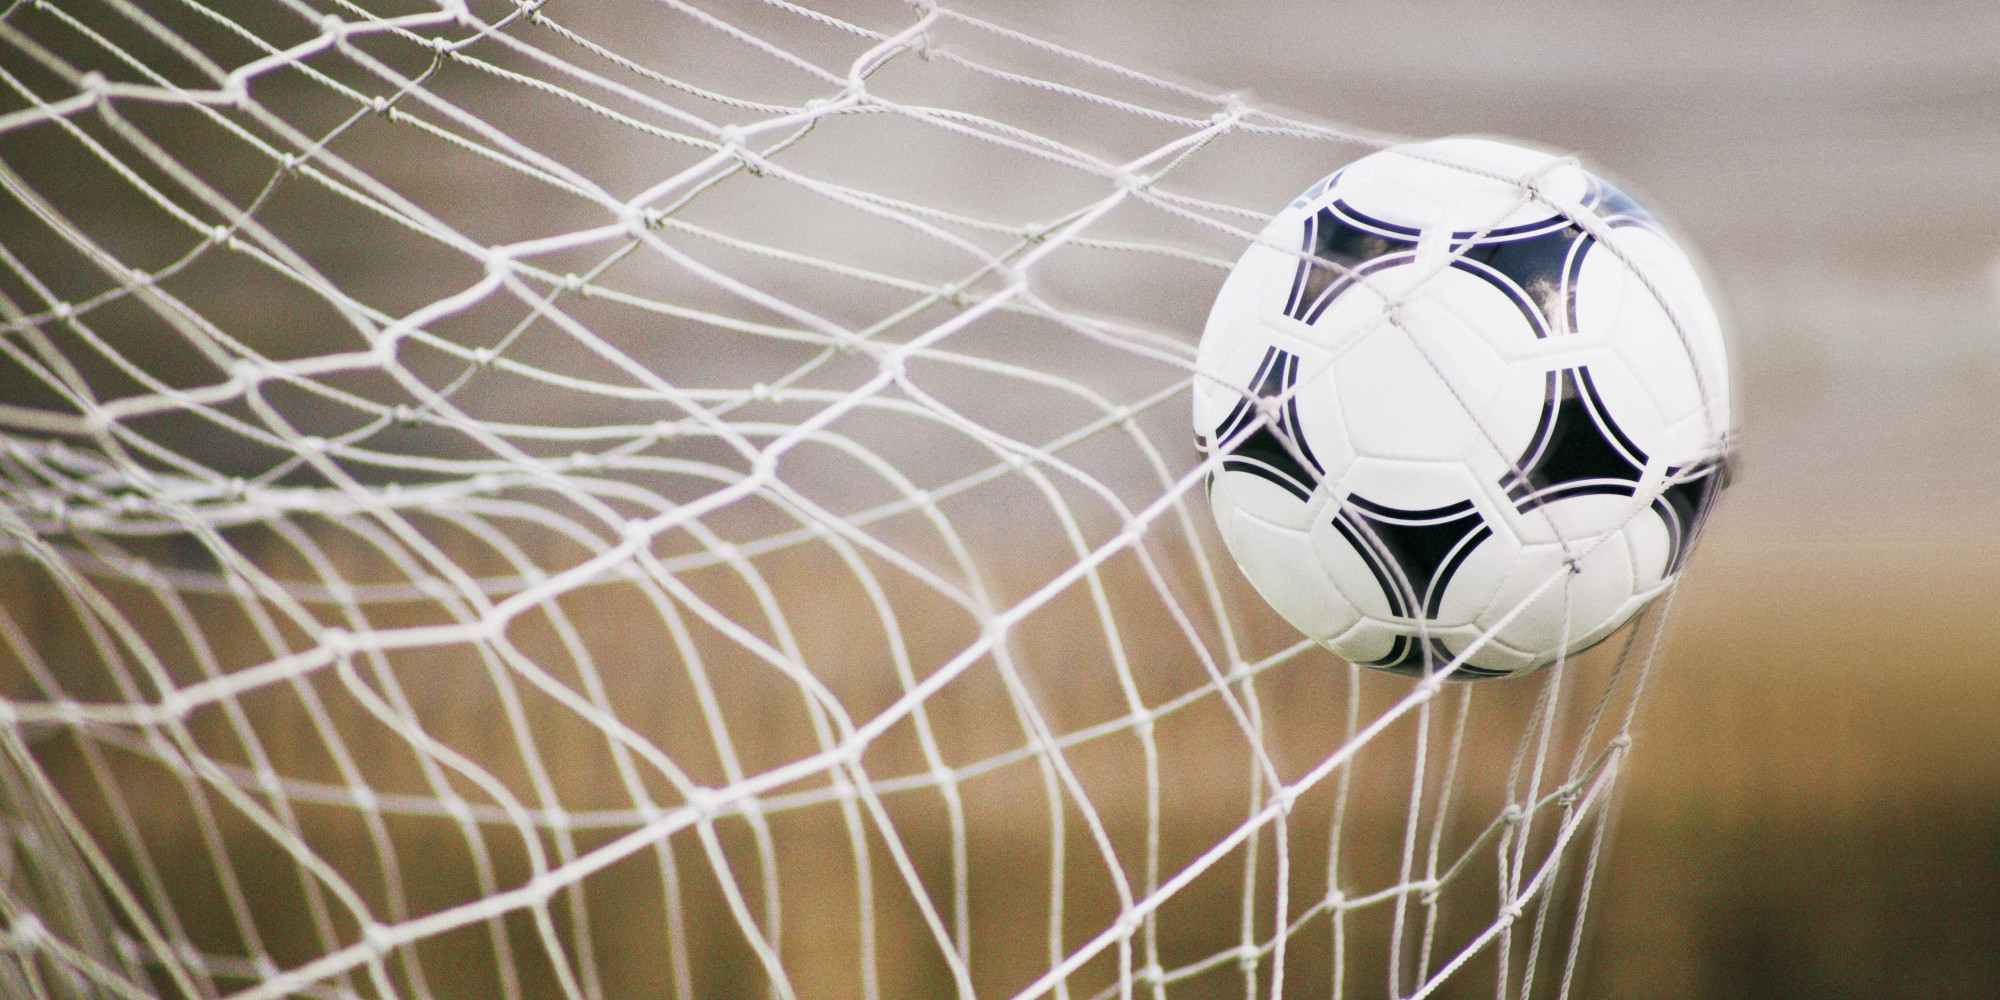 goal-can-we-handle-the-world-cup-streaming-frenzy-huffpost-uk